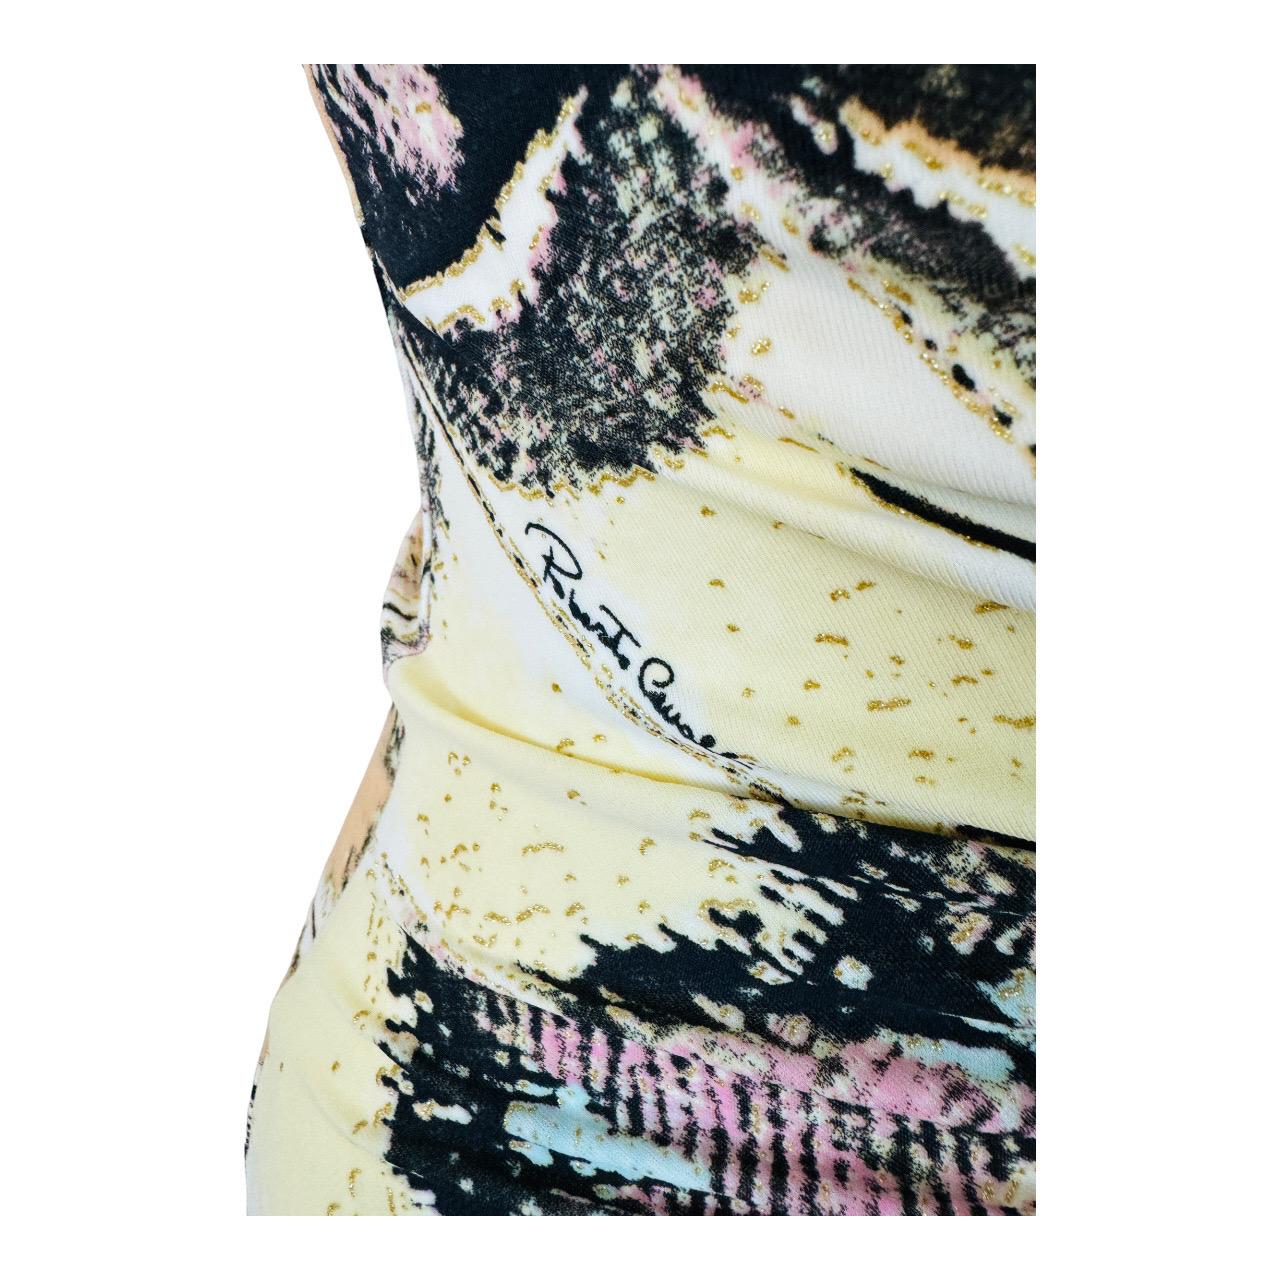 Vintage S/S 2004 Y2K Roberto Cavalli Butterfly Animal Print Midi Dress Feathers For Sale 13